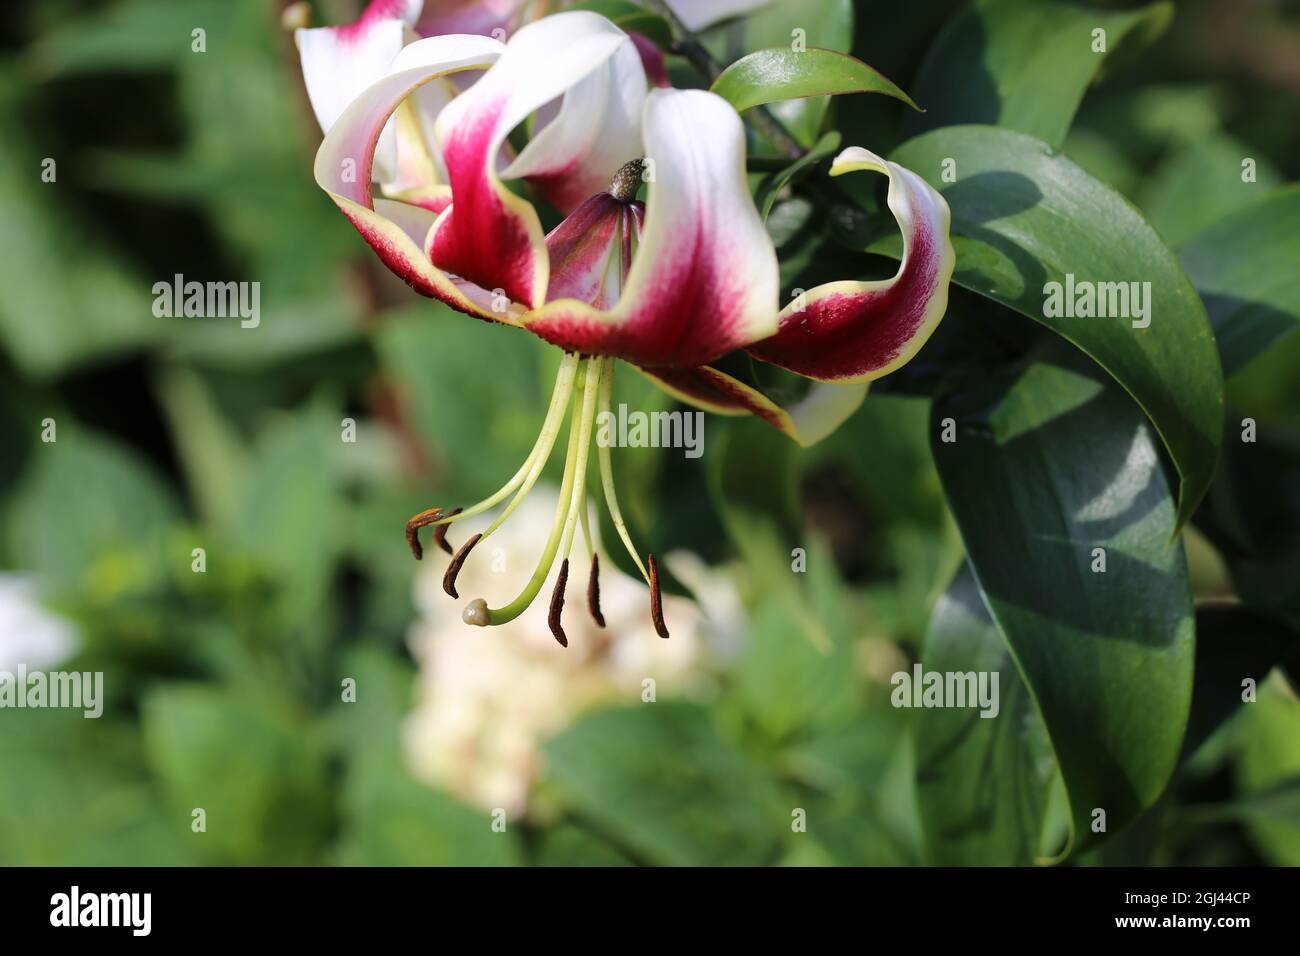 Close-up shot of a beautiful Lilium cernuum flower isolated on a green background. Stock Photo